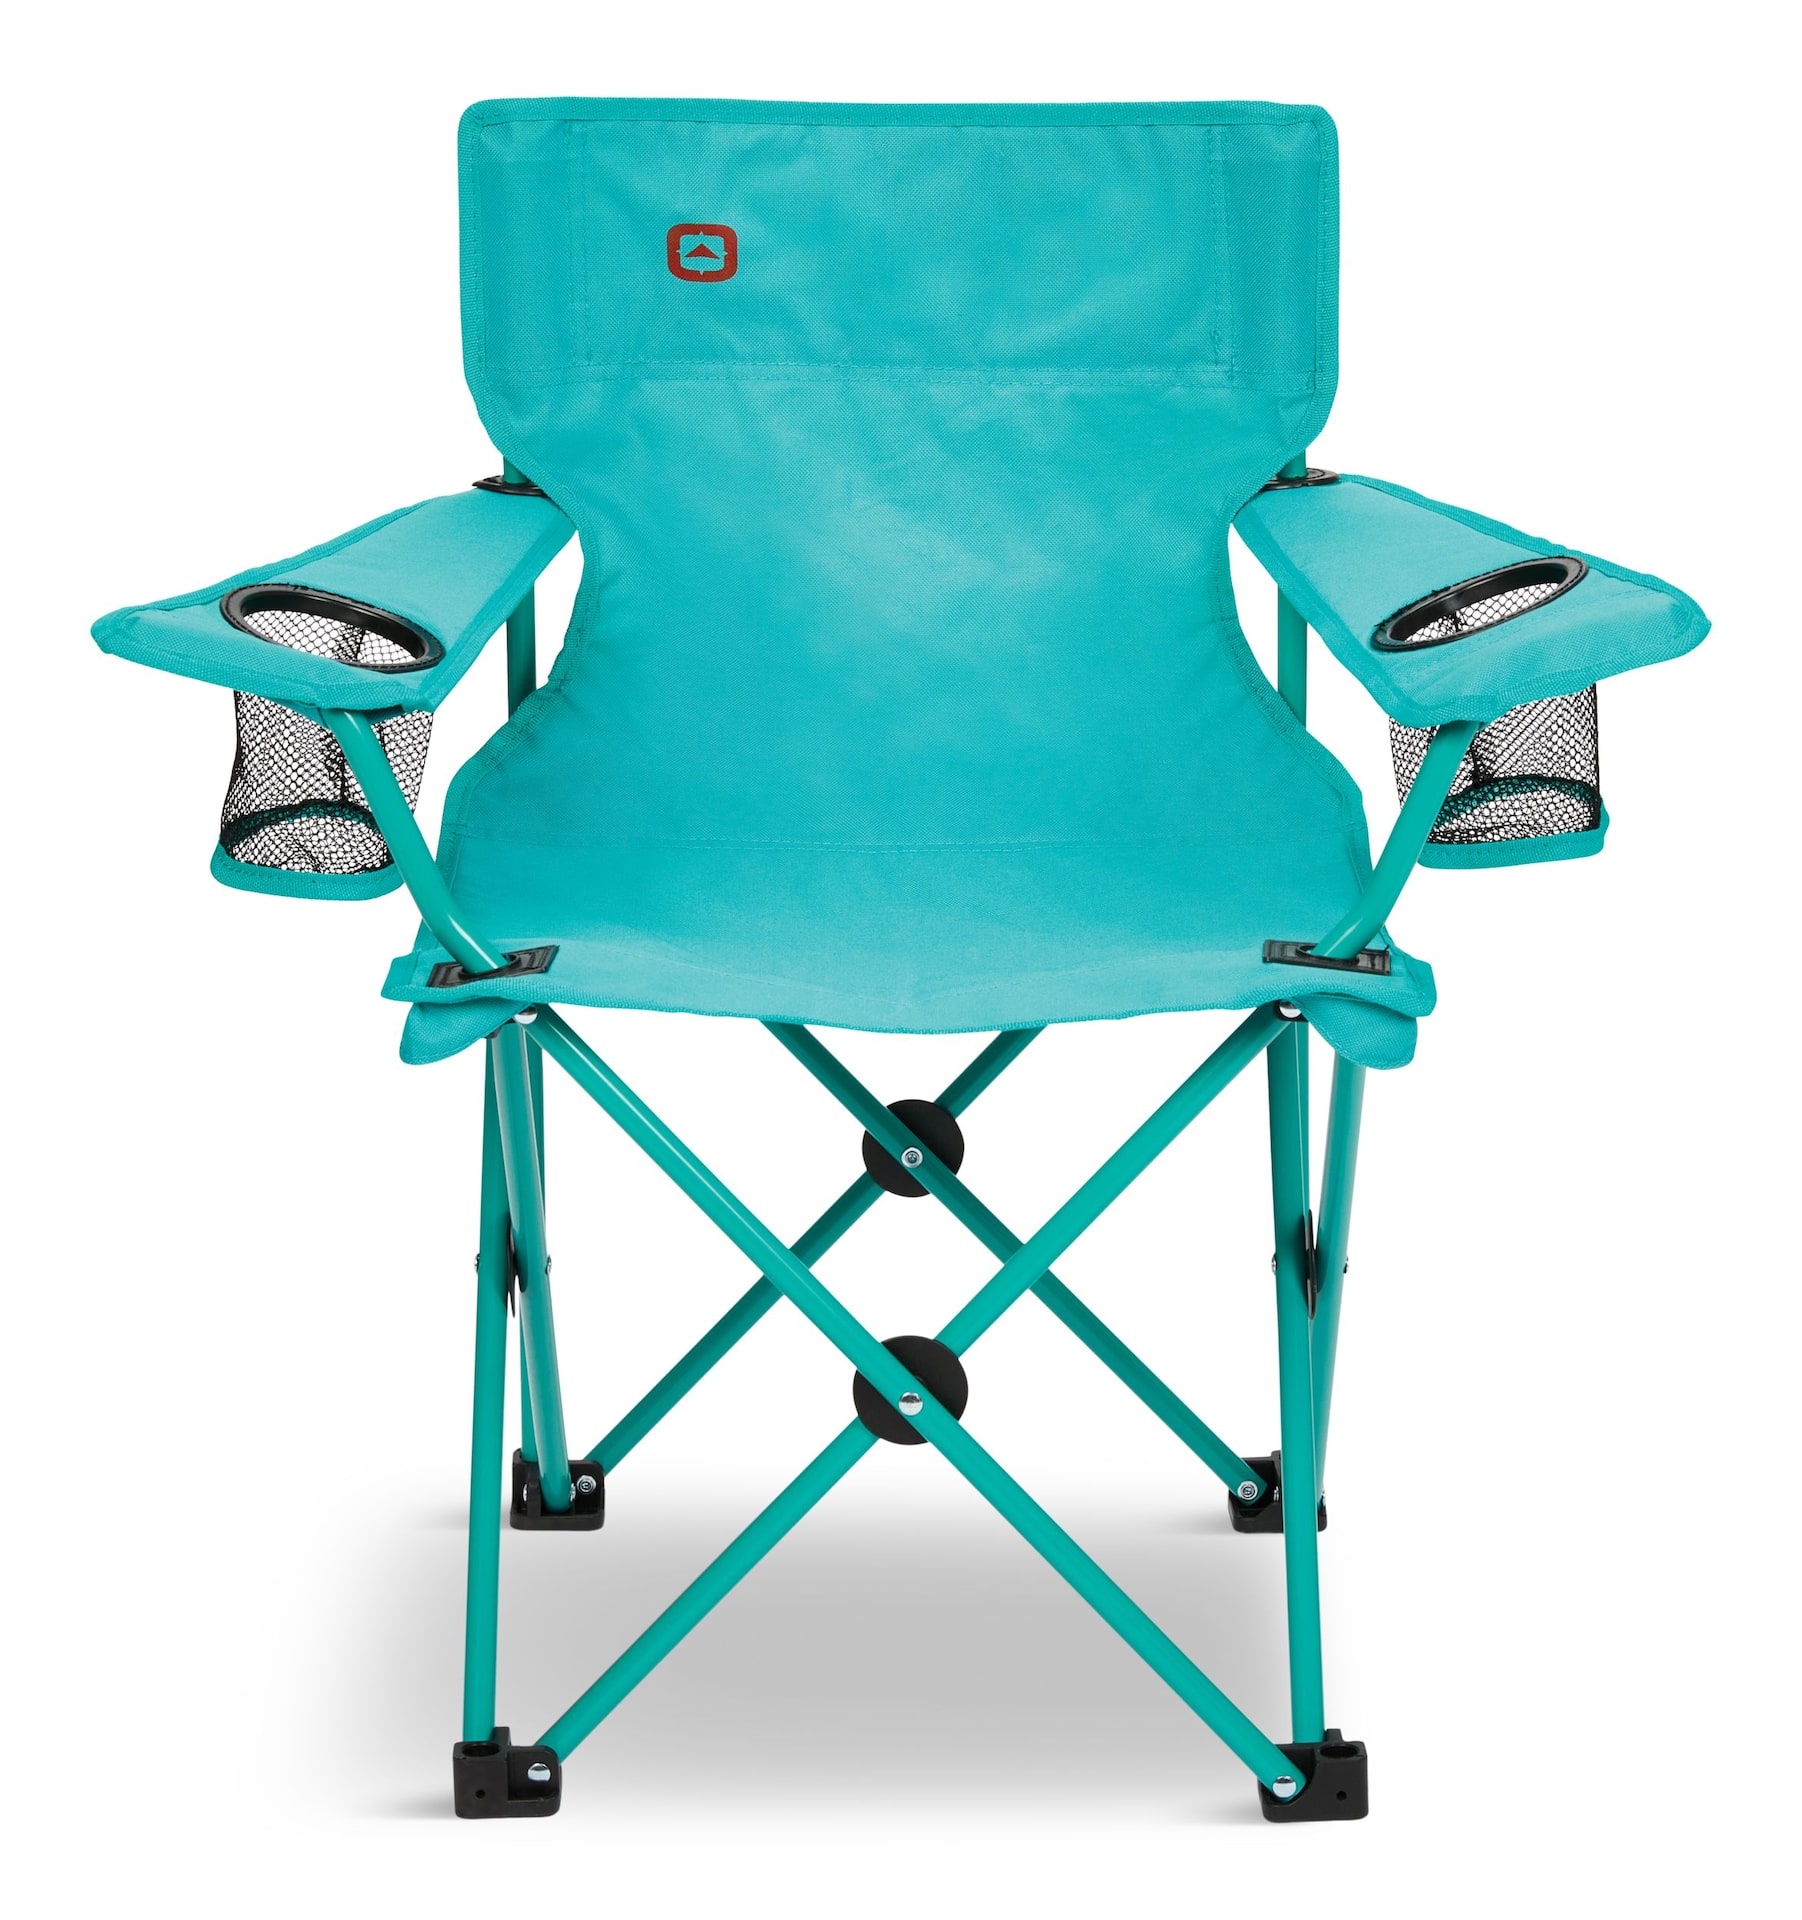 Outbound Kids' Mesh Back Folding Camping Quad Chair w/ Cup Holder